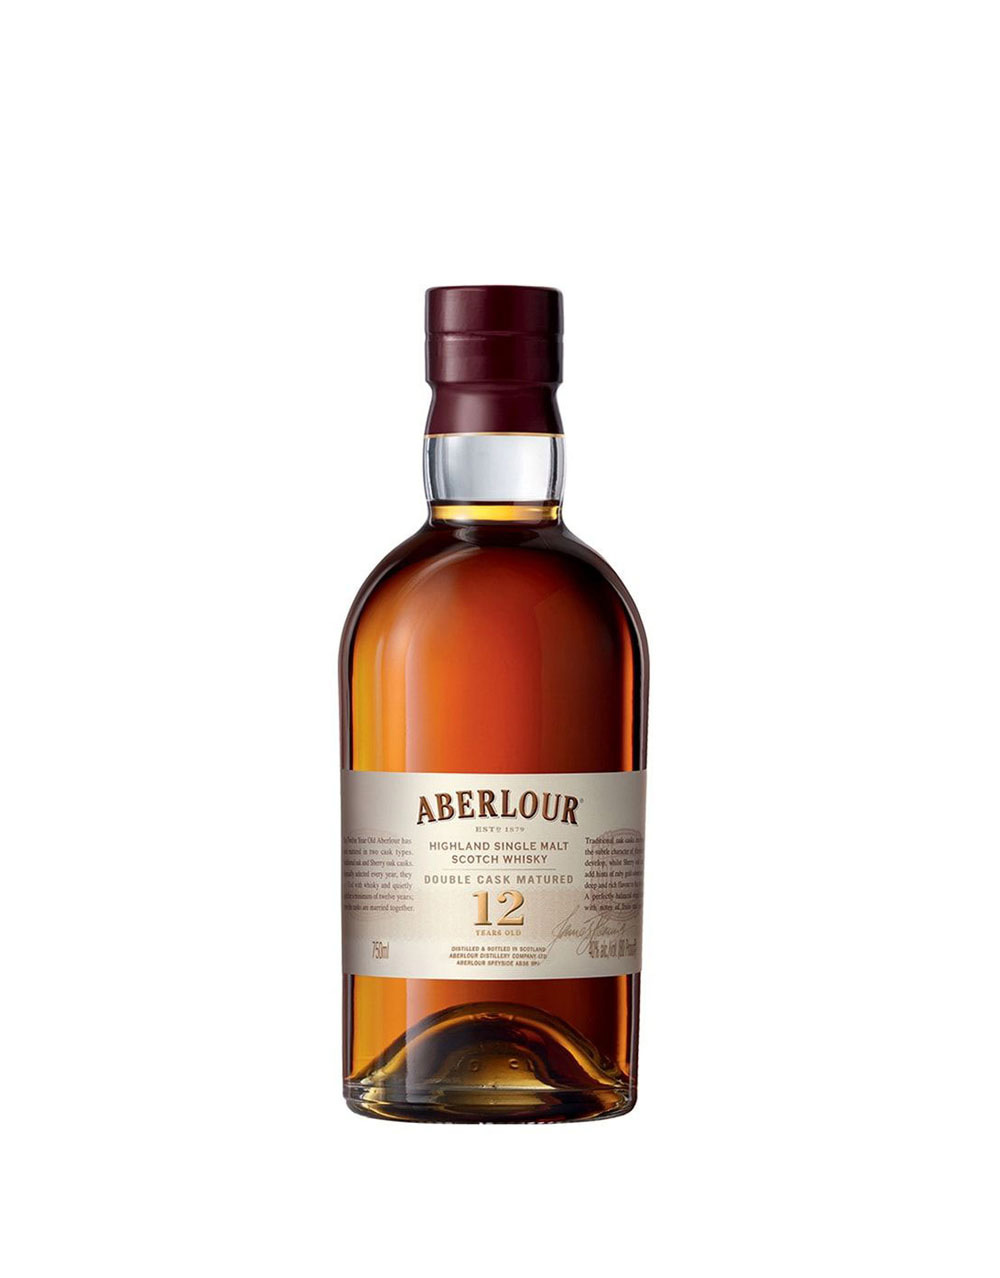 Aberlour 12 Year Old Gold bar limited edition